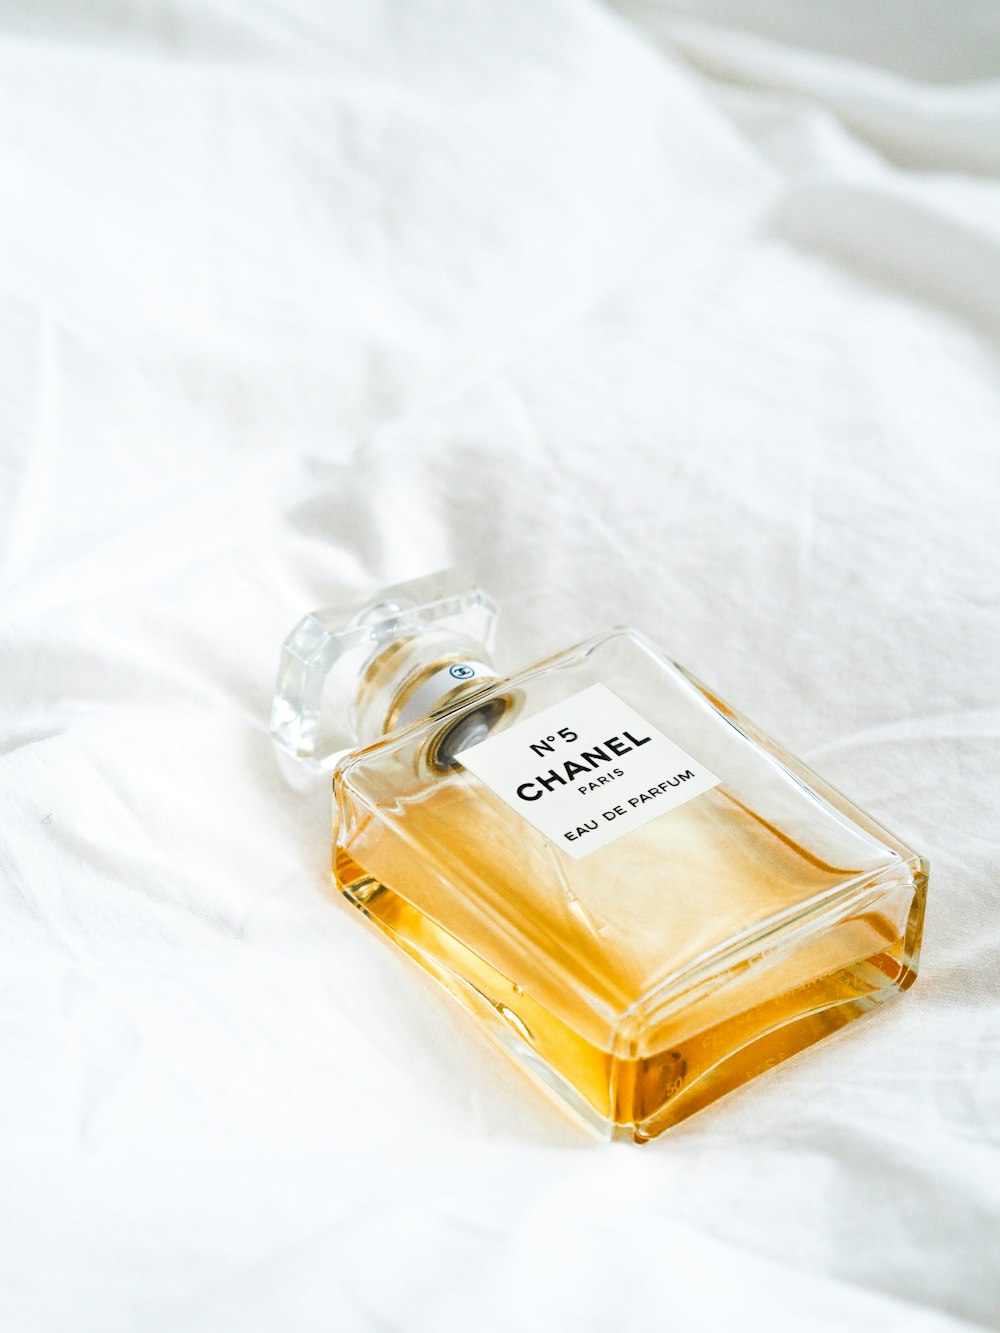 Printable Pictures of Chanel No. 5 Perfume Bottle